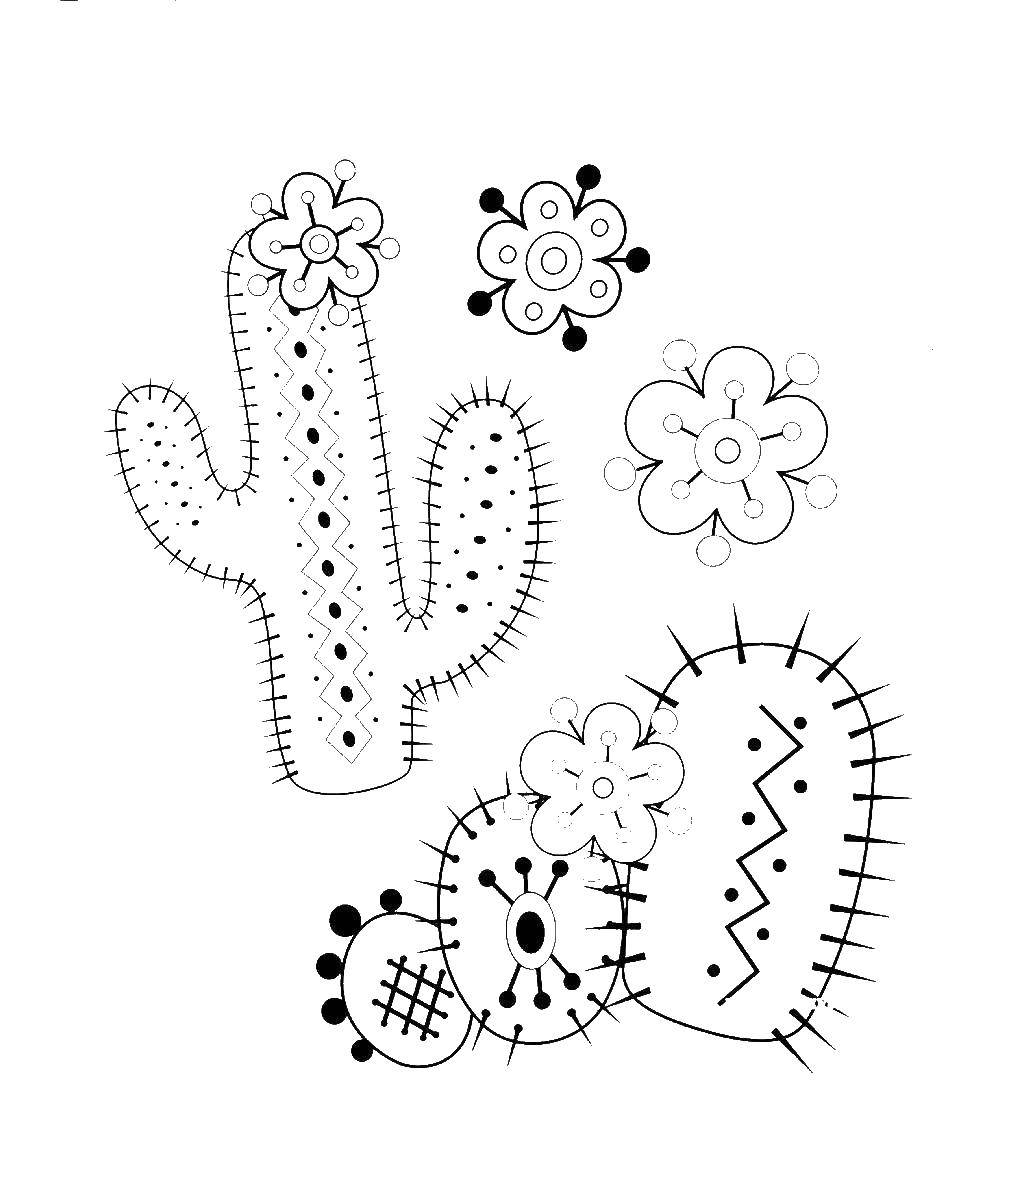 Coloring Cacti, flowers. Category plants. Tags:  plants, cacti, flowers.